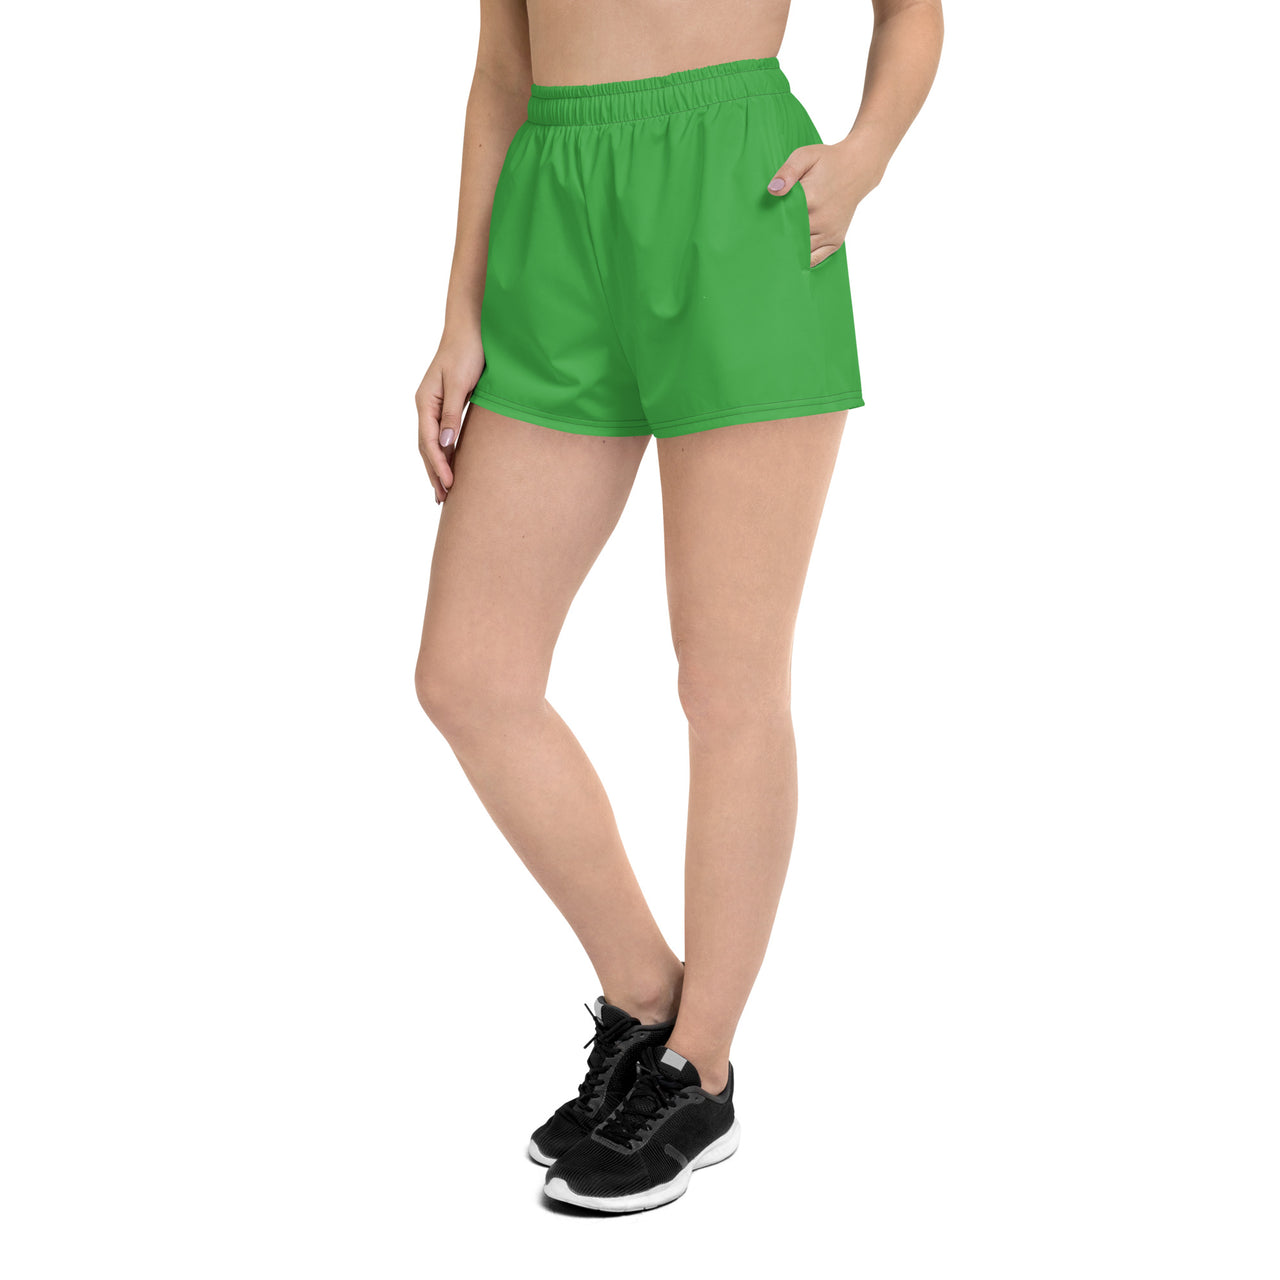 Women’s Recycled Solid Athletic Shorts - Green SHAVA CO